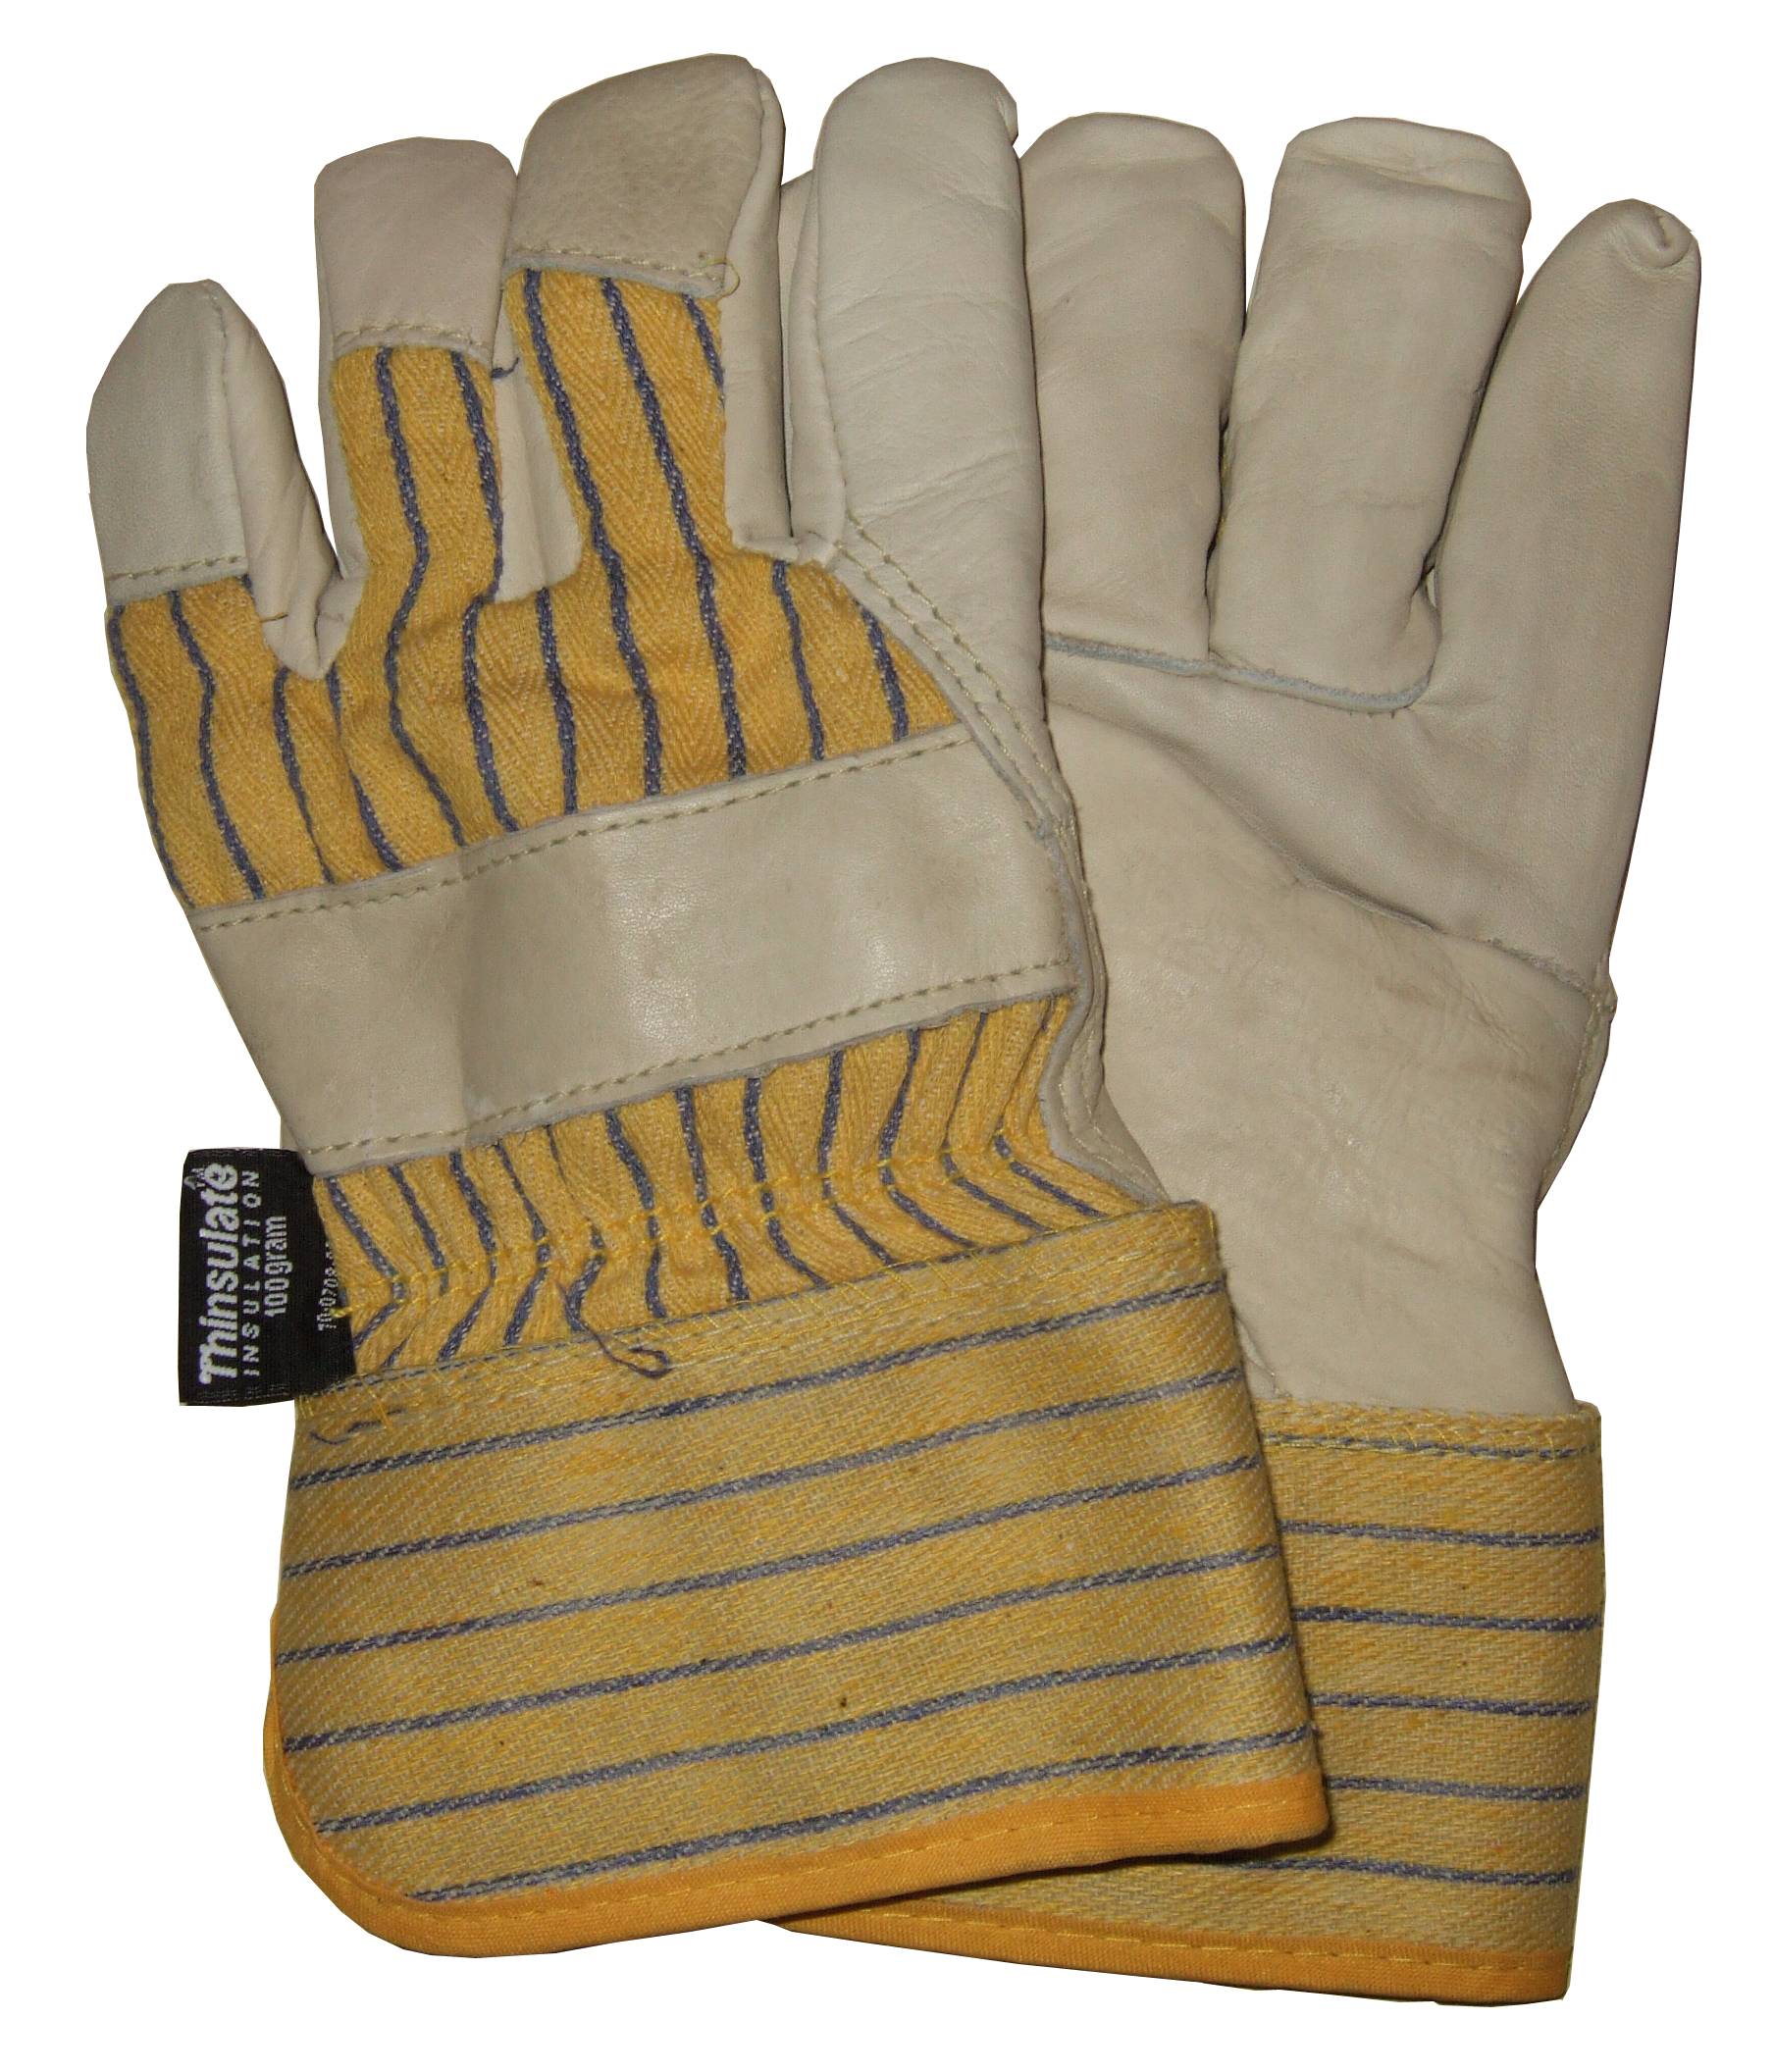 Thinsulate® lined Goat Skin Kevlar Lined Extended Cuff glove